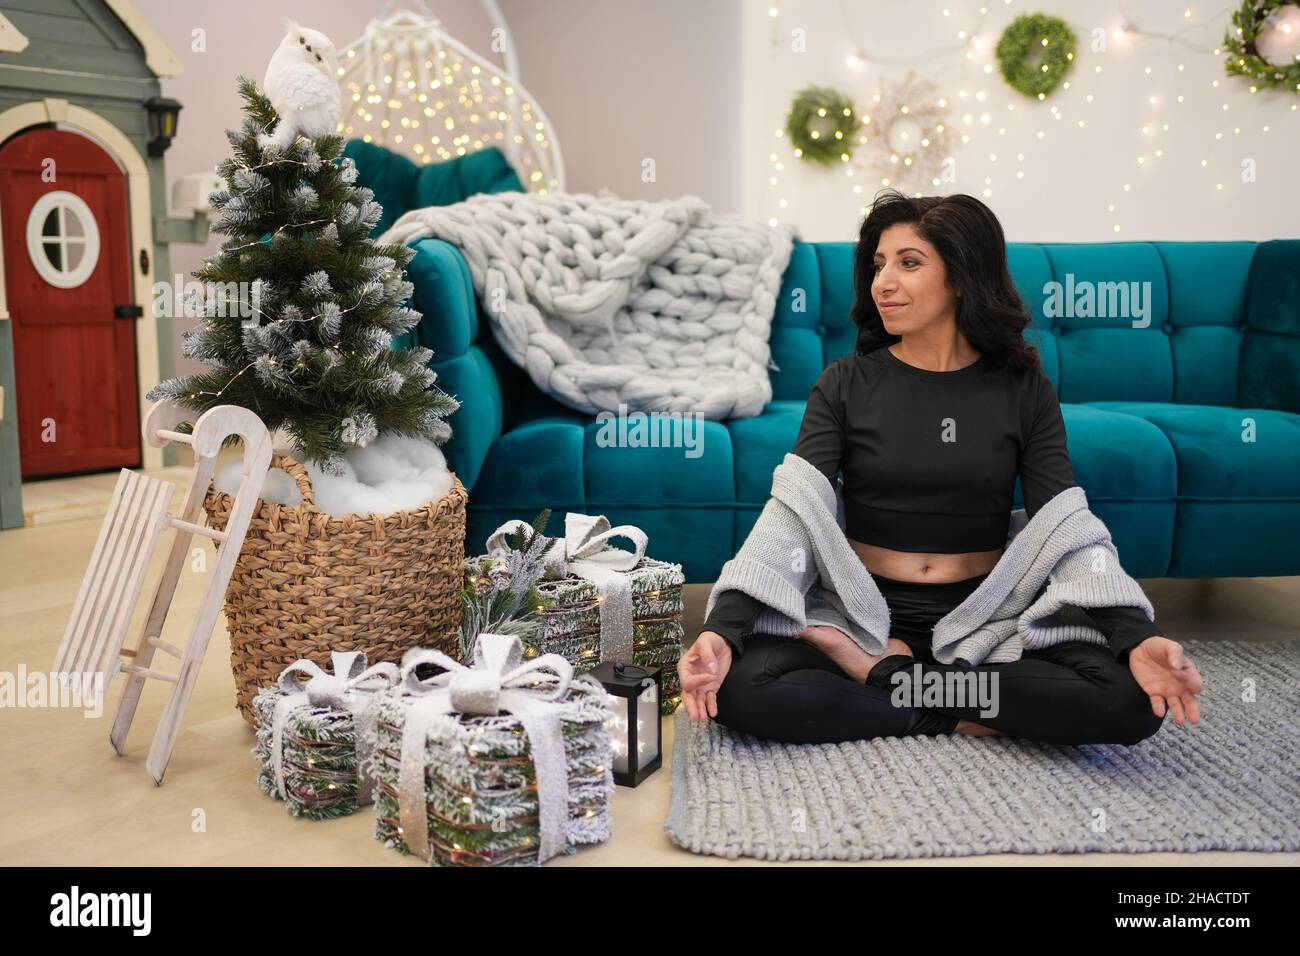 Portrait of middle age woman meditating while sitting near sofa and Christmas tree Stock Photo